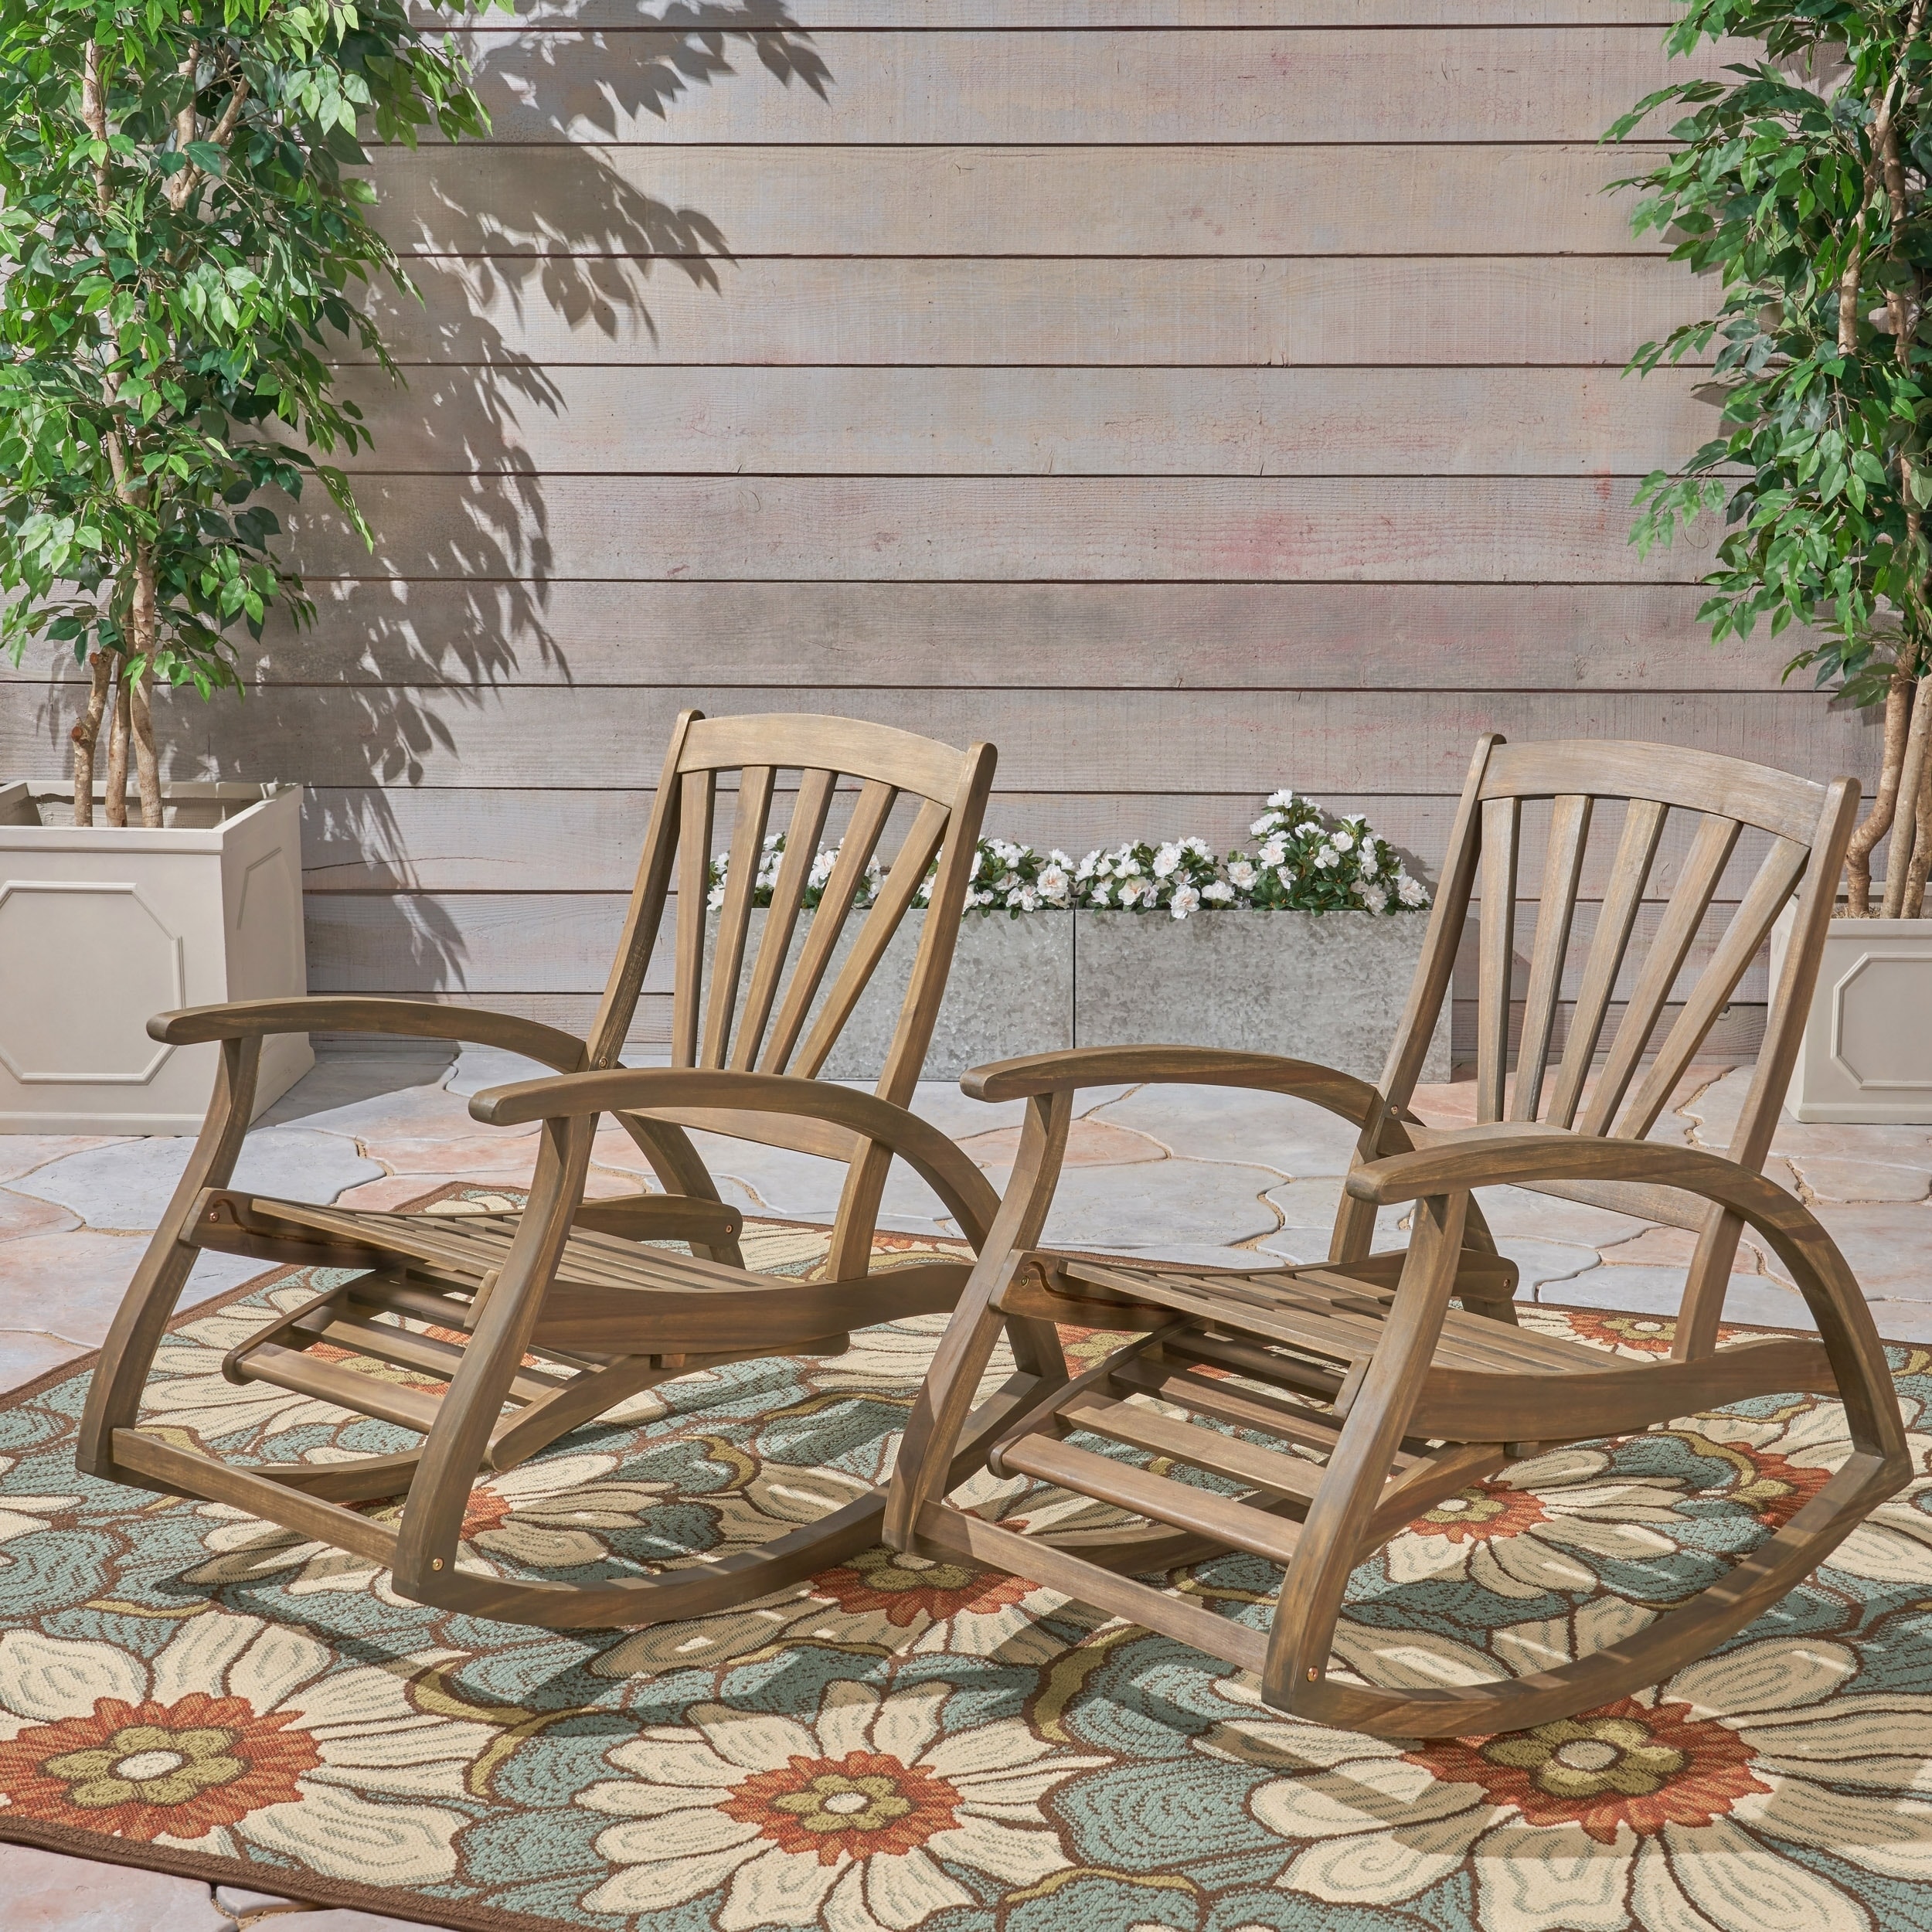 Sunview Outdoor Rustic Acacia Wood Recliner Rocking Chairs eBay